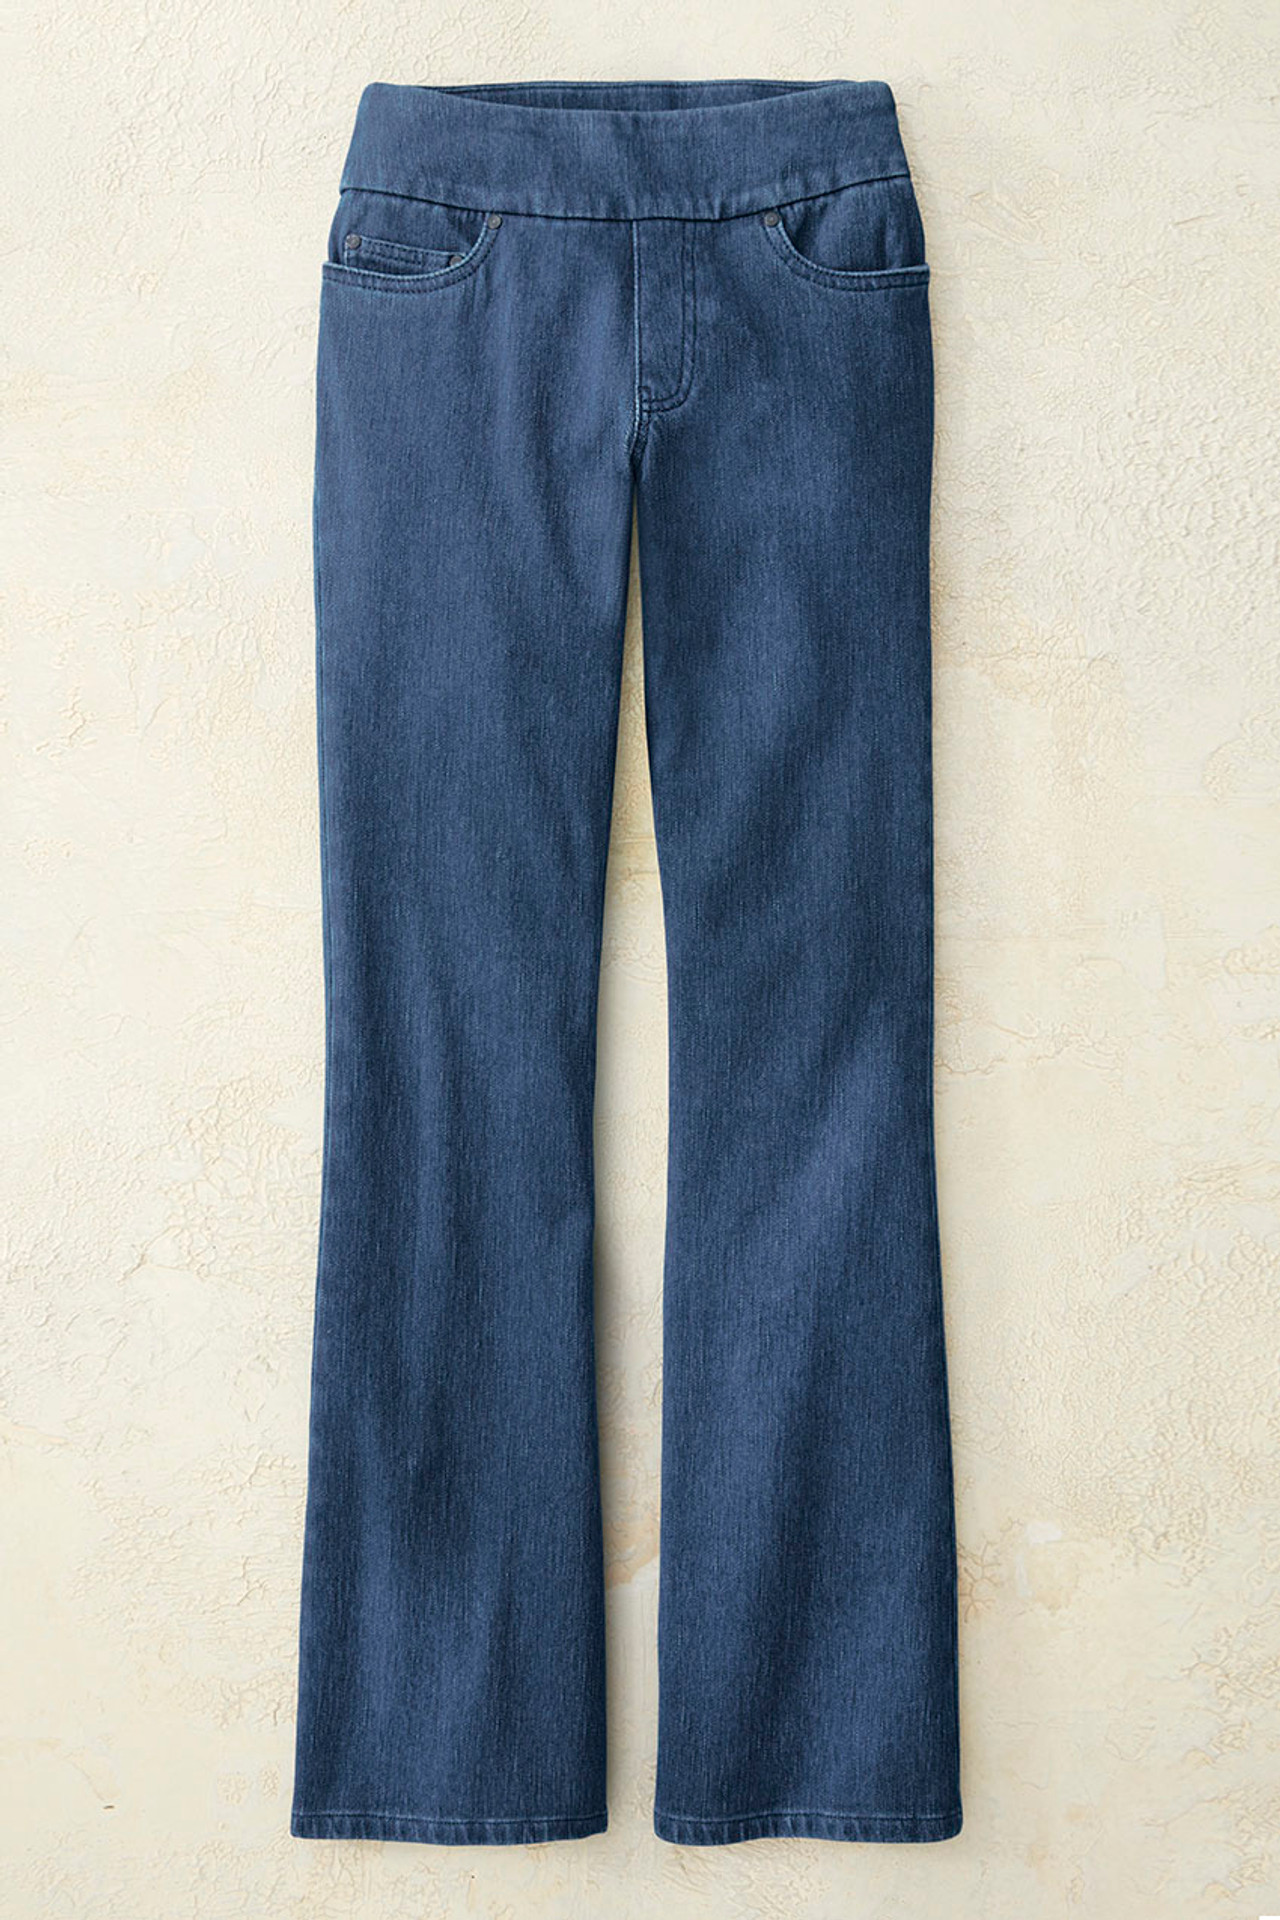 Knit Denim Pull-On Bootcut Jeans